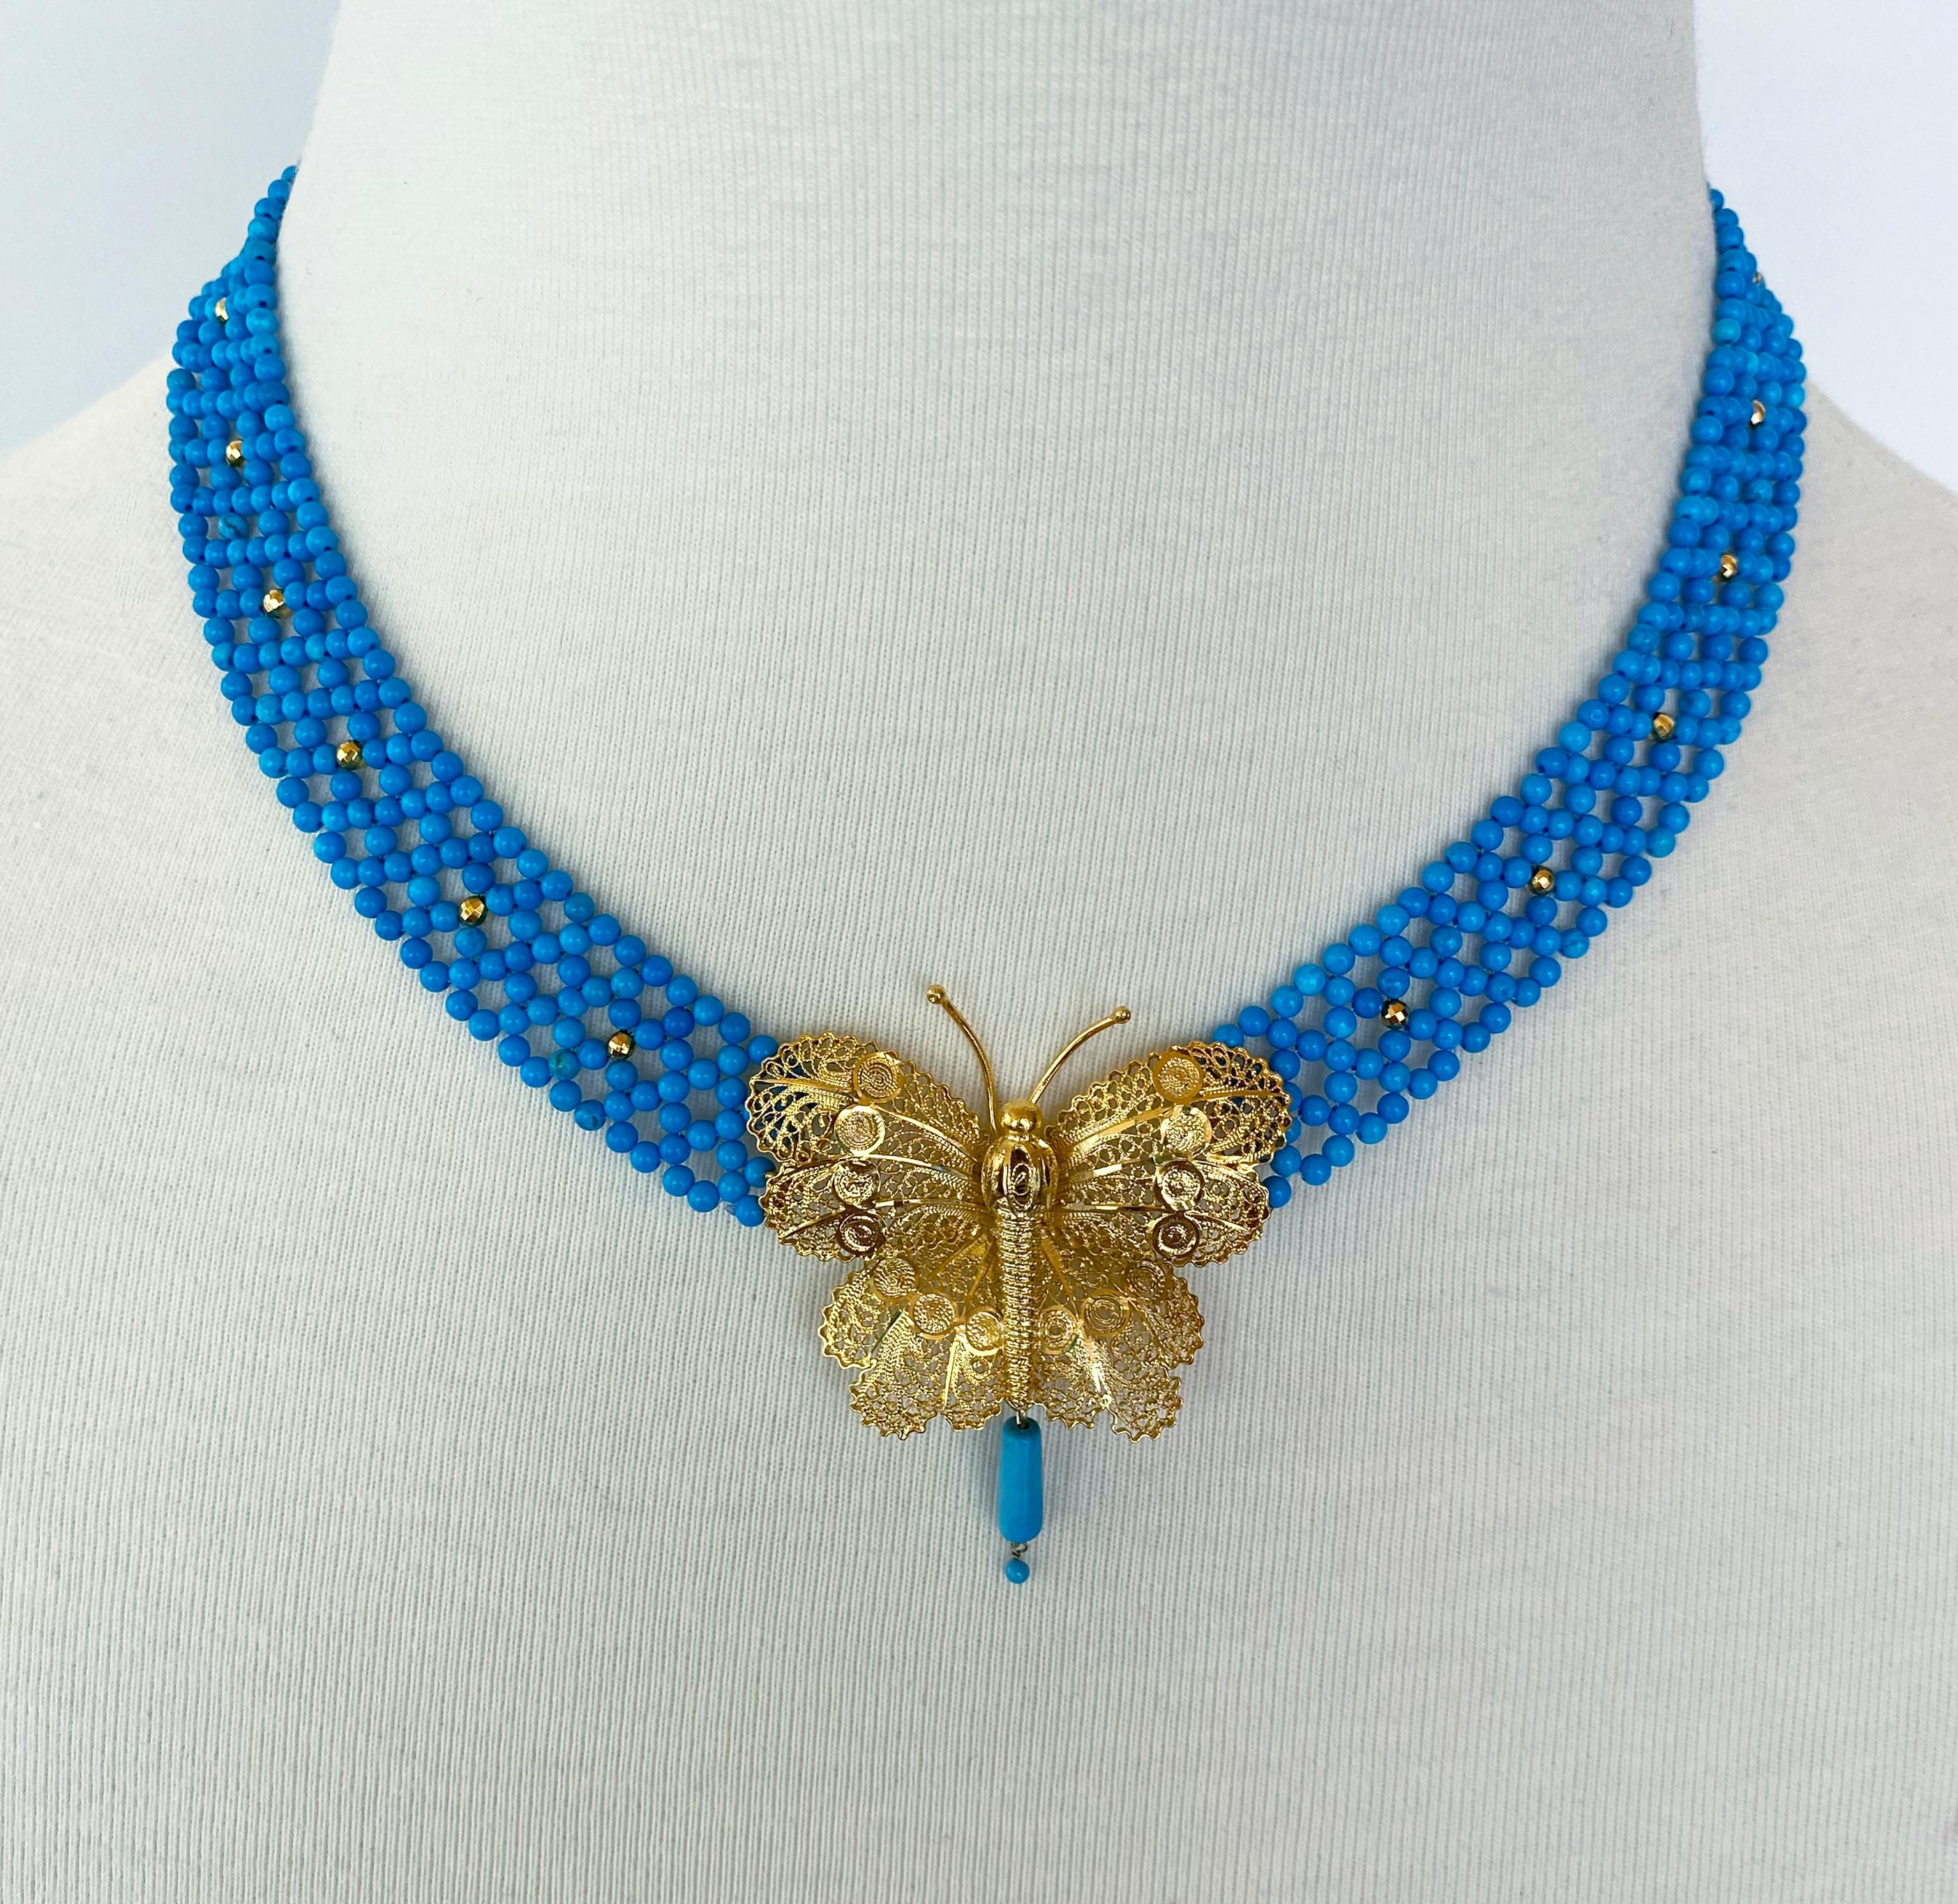 Beautiful One of A Kind Necklace by Marina J. A Vintage 18k Yellow Gold Plated Butterfly Brooch with intricate filigree detailings has been reworked into a stunning Centerpiece. The Butterfly is attached to a Lace Woven Turquoise band with faceted